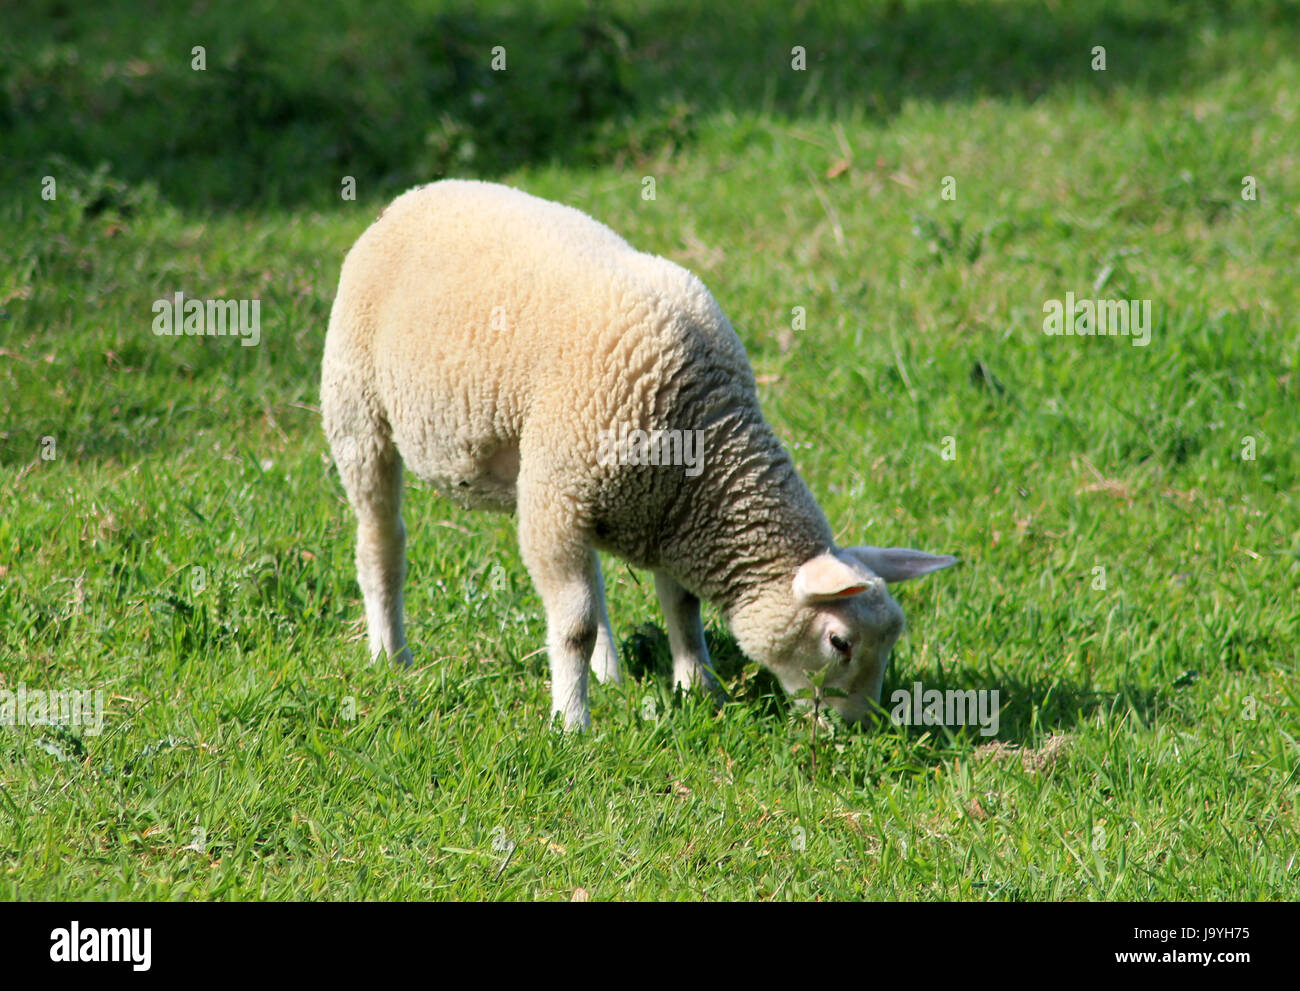 profile, animal, agriculture, farming, field, sheep, spring, bouncing, bounces, Stock Photo